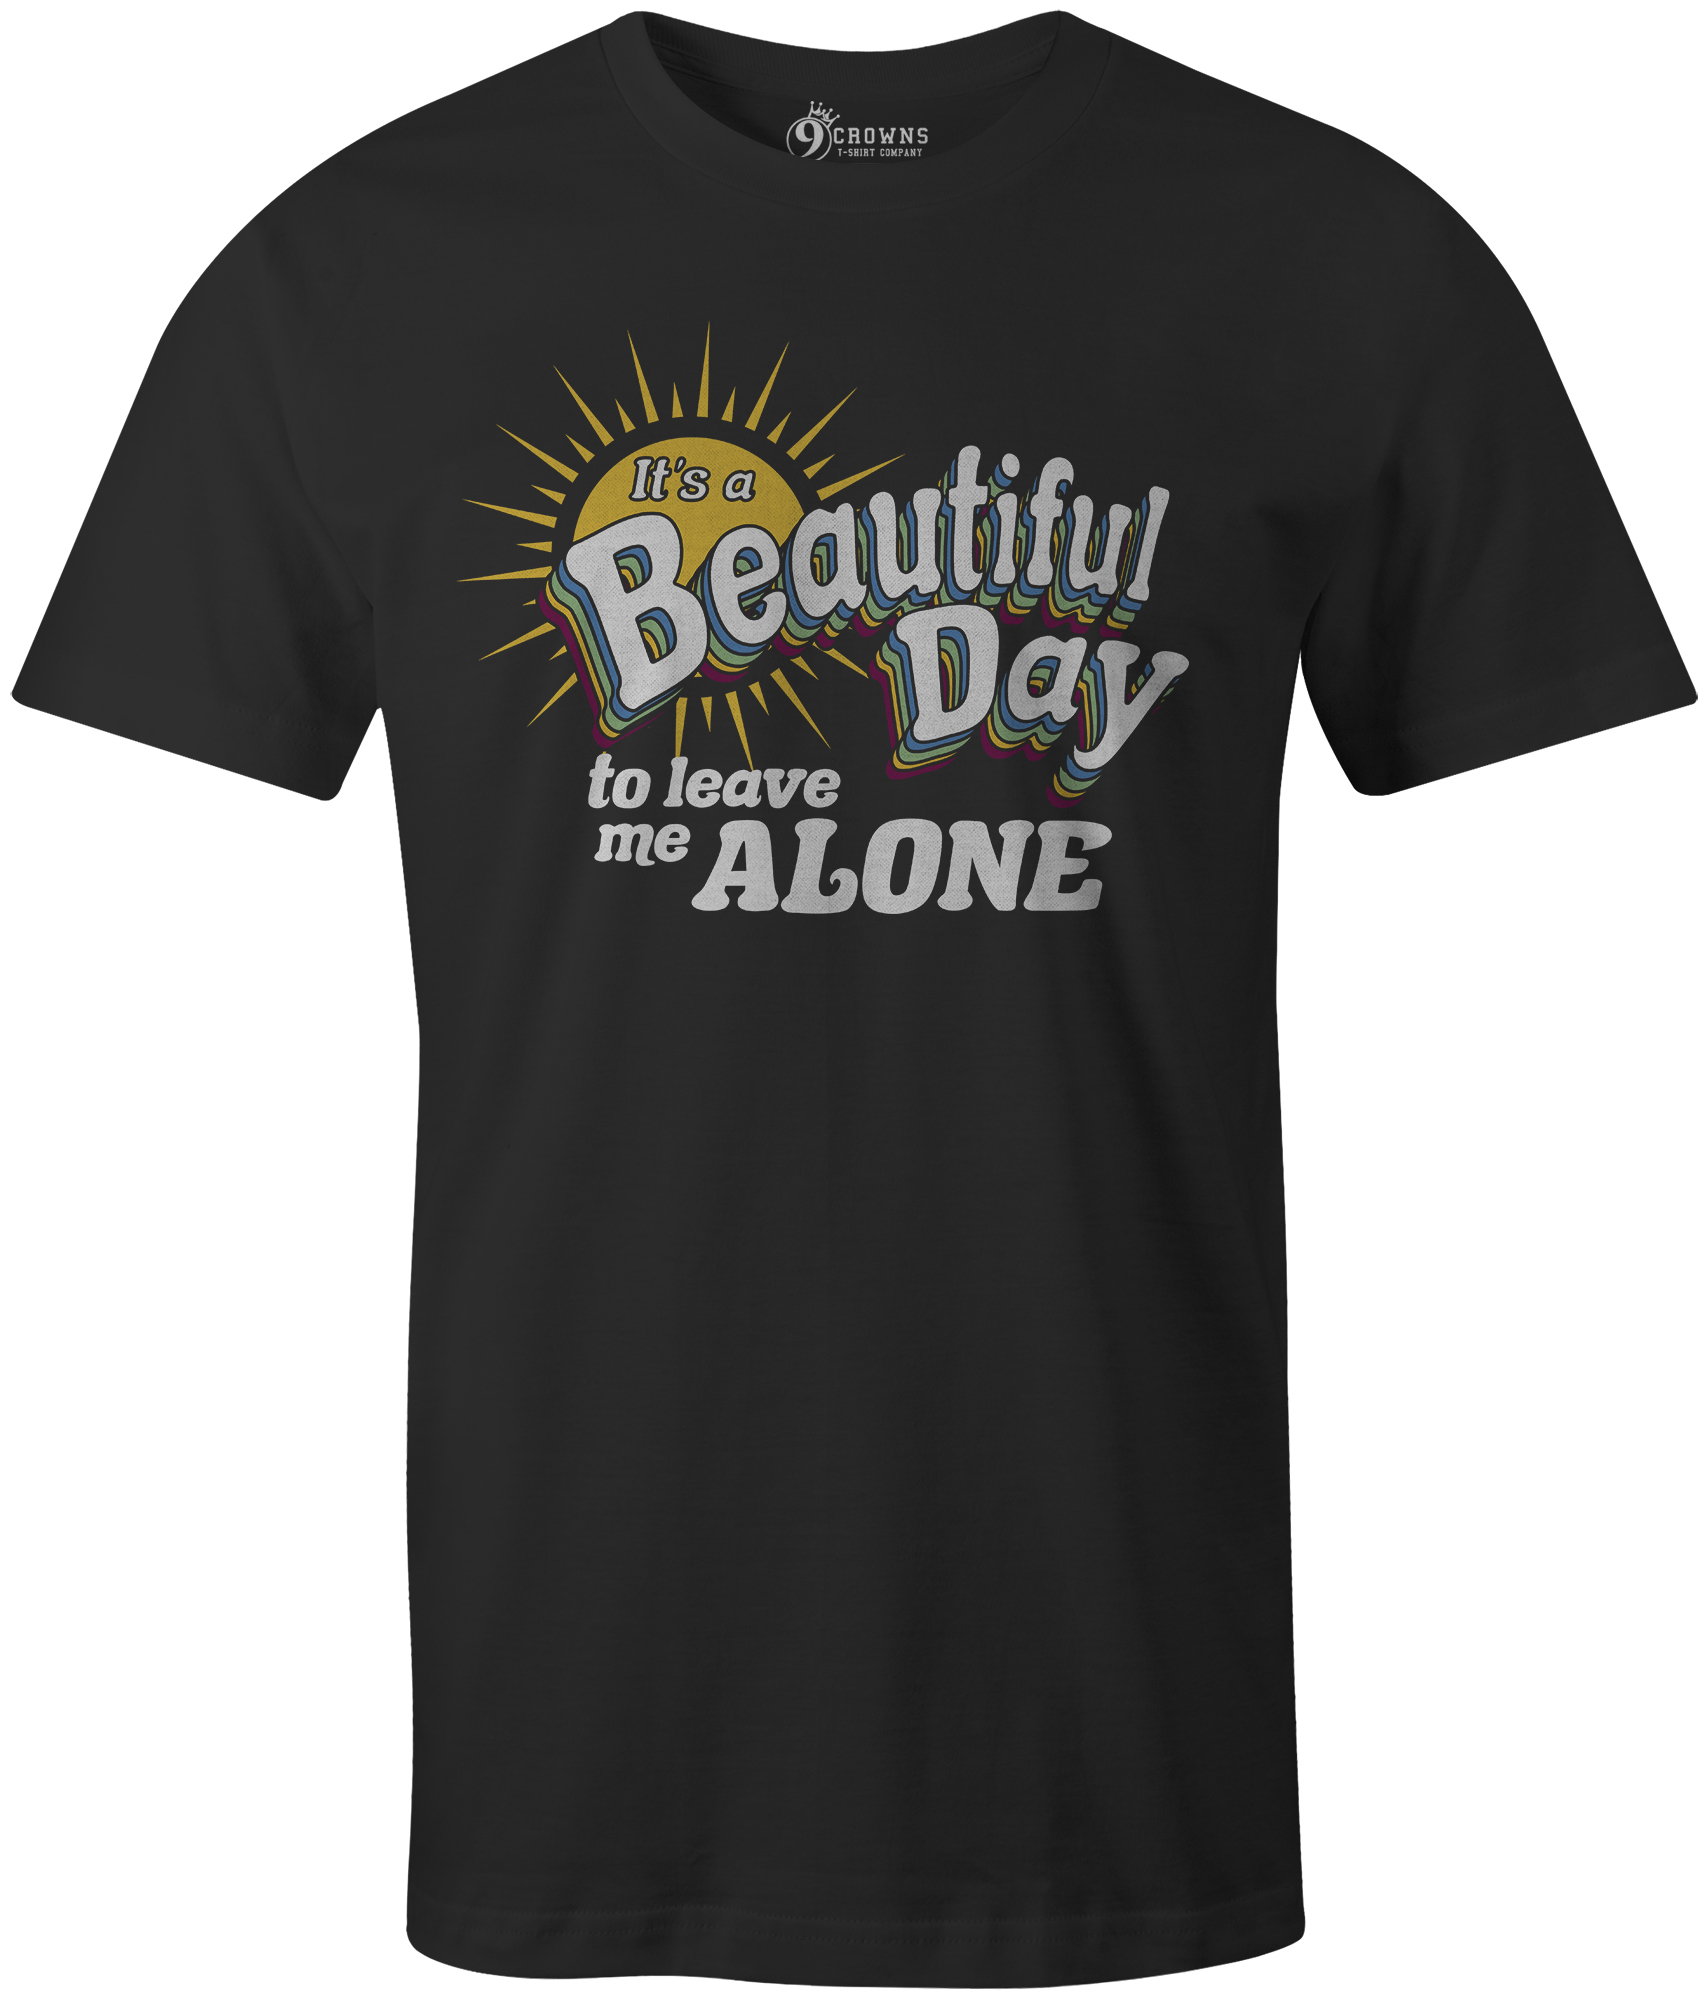 9 Crowns Tees It's a Beautiful Day to Leave Me Alone Graphic T-Shirt | eBay